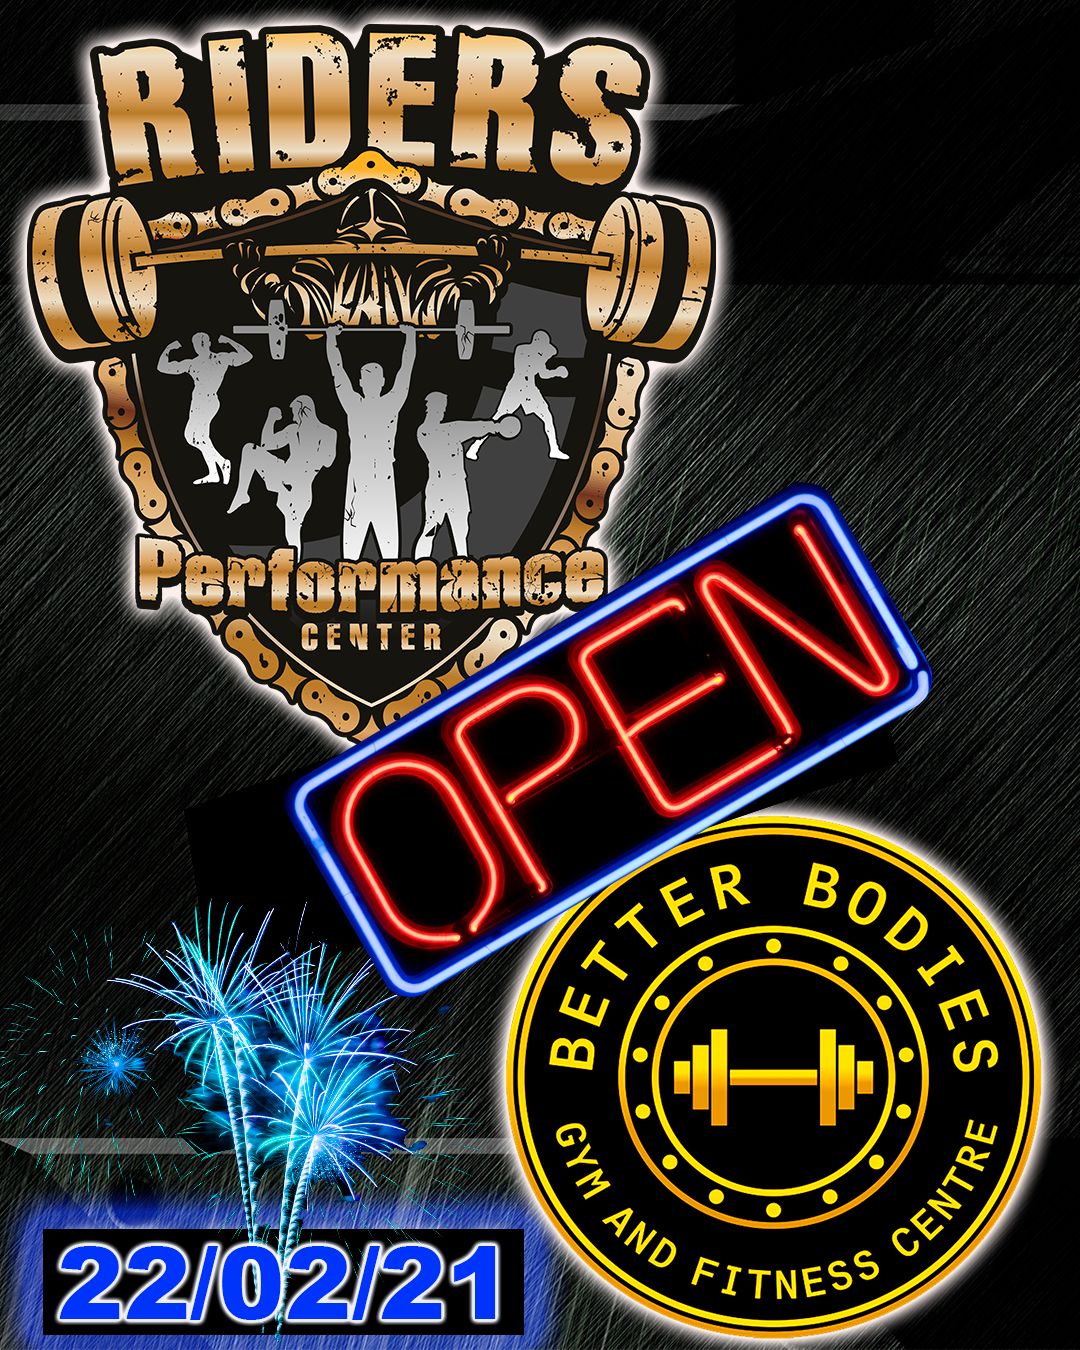 Reapertura del gimnasio / Reopening of the Gym